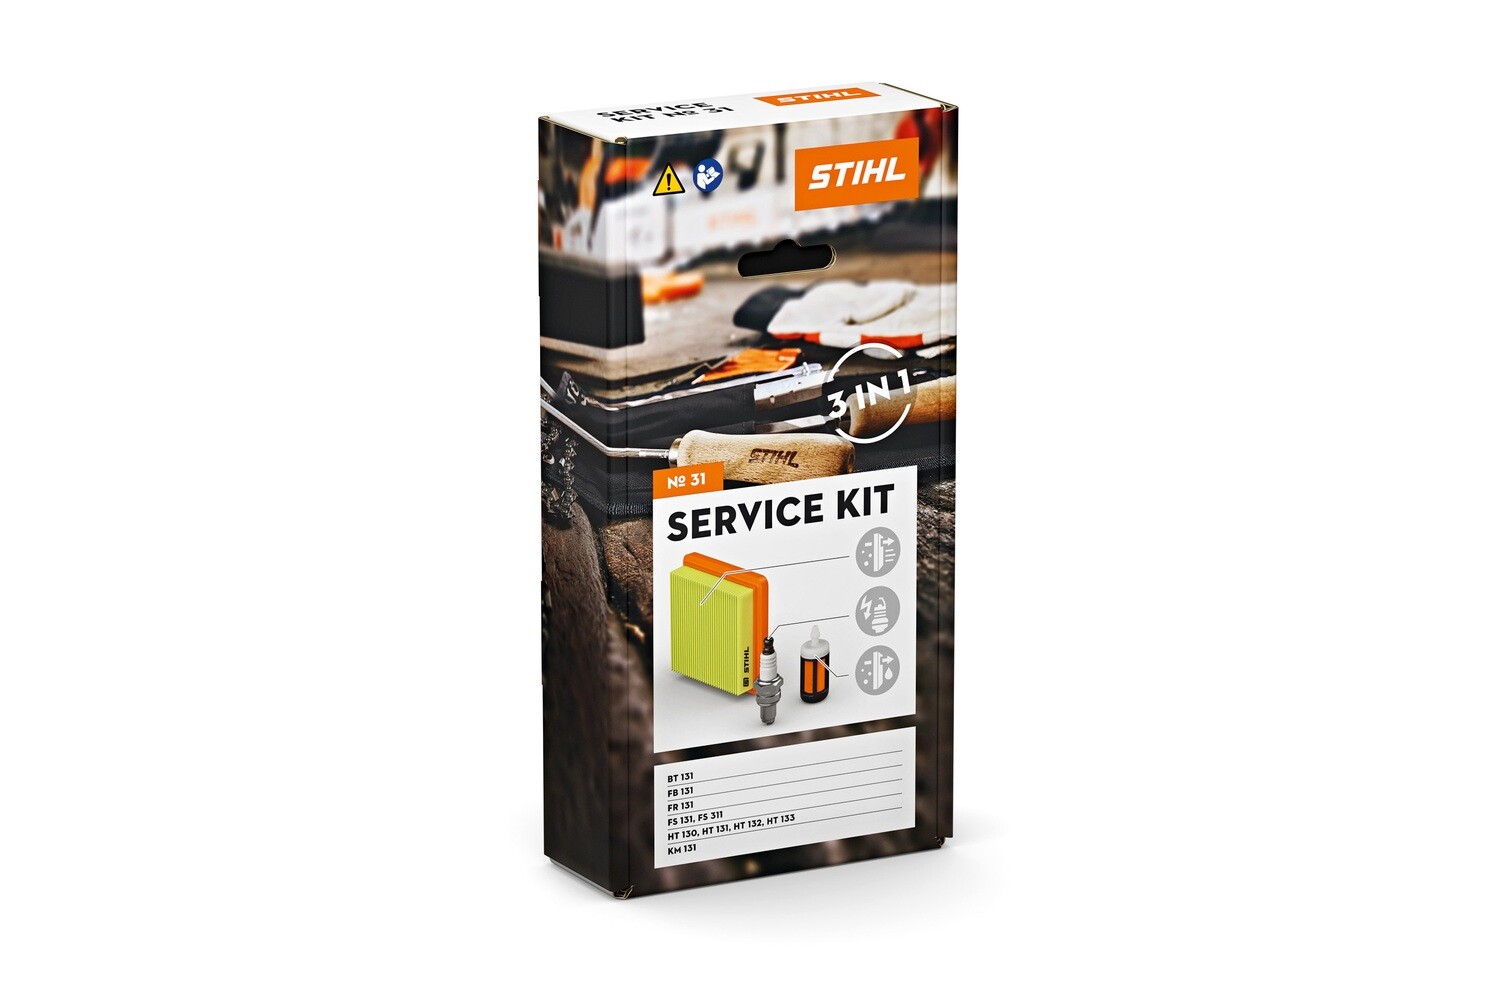 Stihl Petrol Earth Augers, Brushcutters Service Kit 31